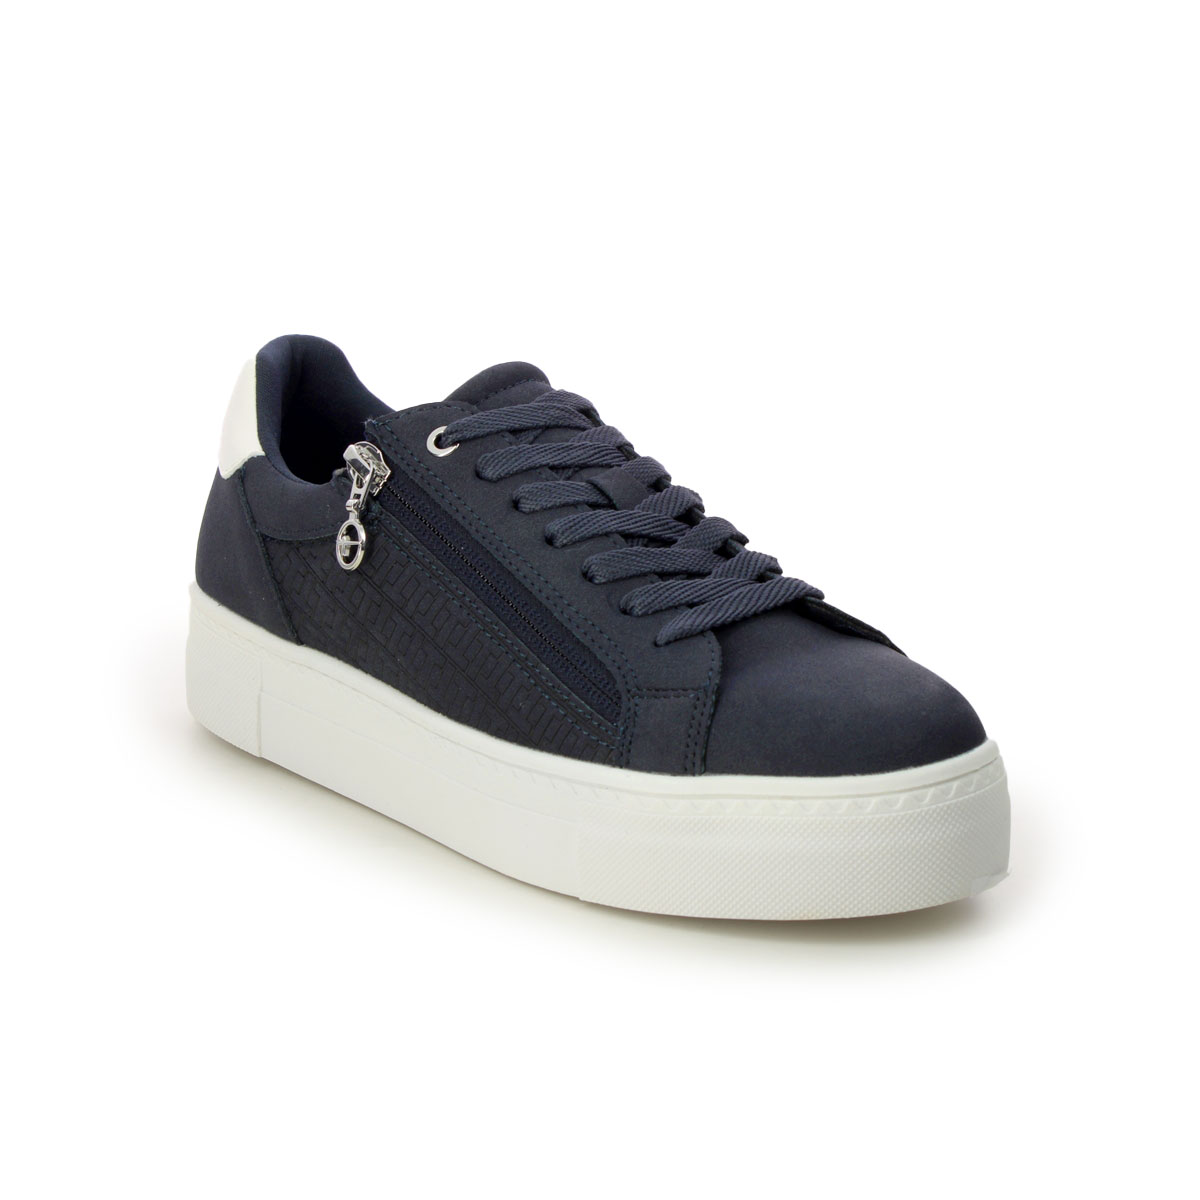 Tamaris Lima Zip Navy Womens trainers 23313-41-805 in a Plain Man-made in Size 41